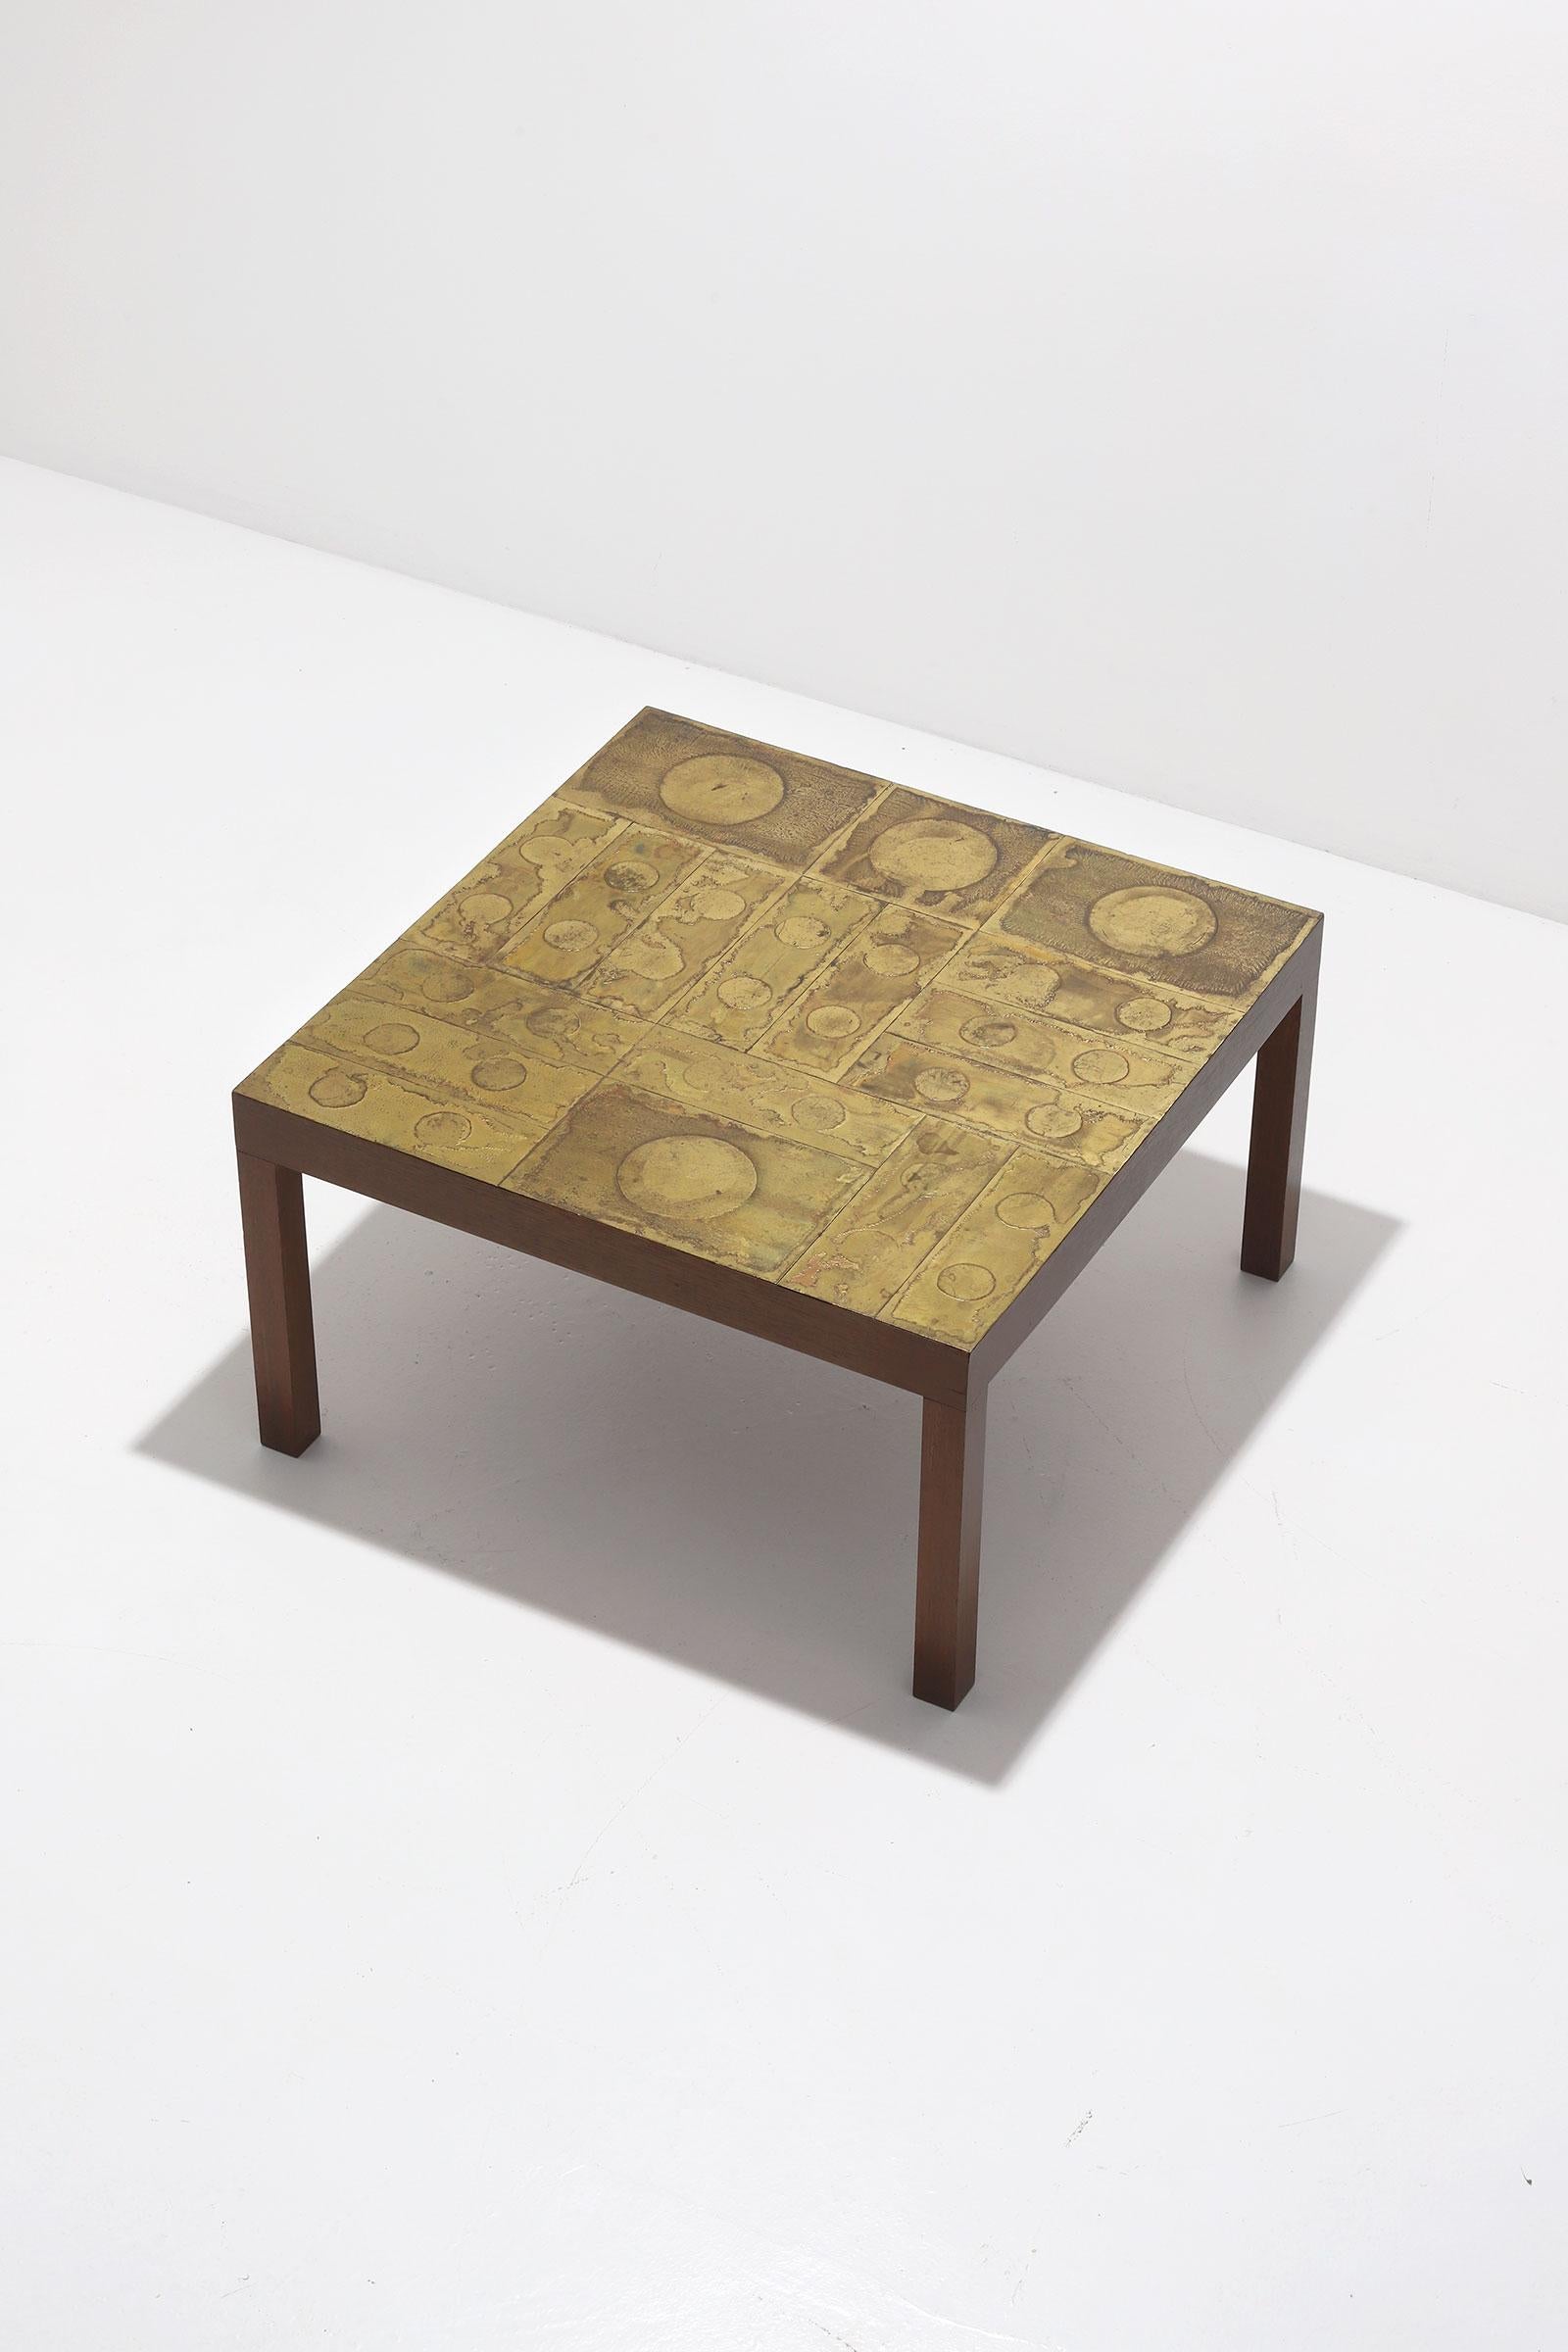 Modern Willy Daro Brass Etched Coffee Table 1970s with Wooden Frame and Brass Top For Sale